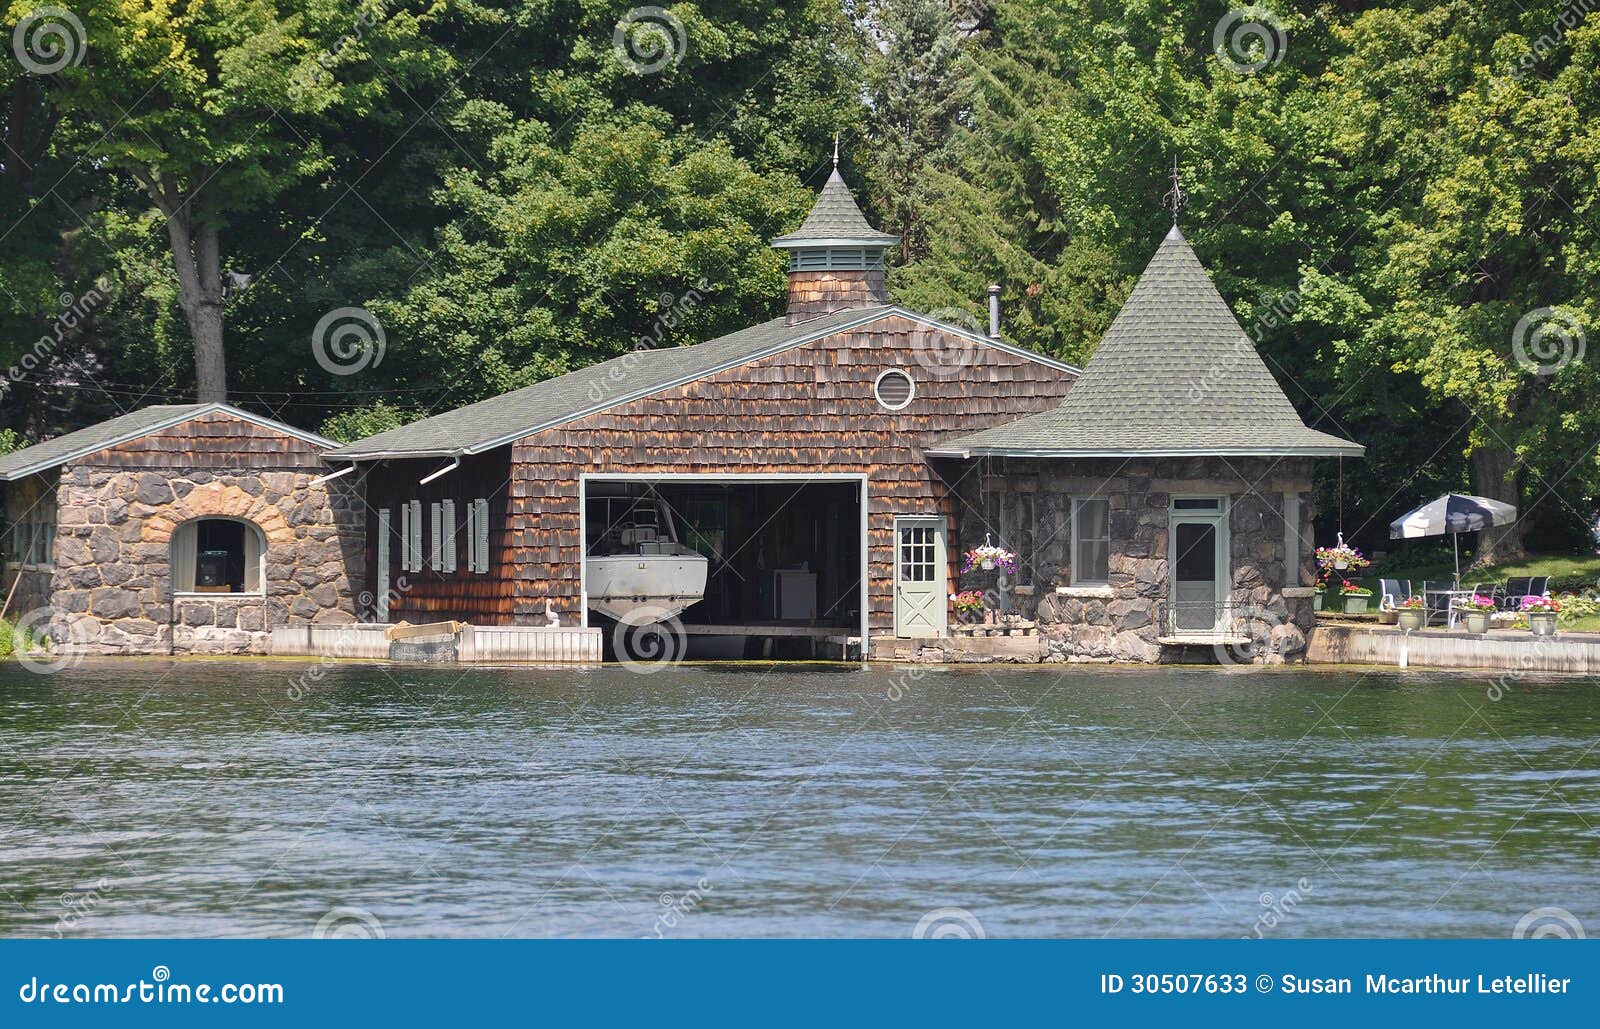 boathouse in the thousand islands america